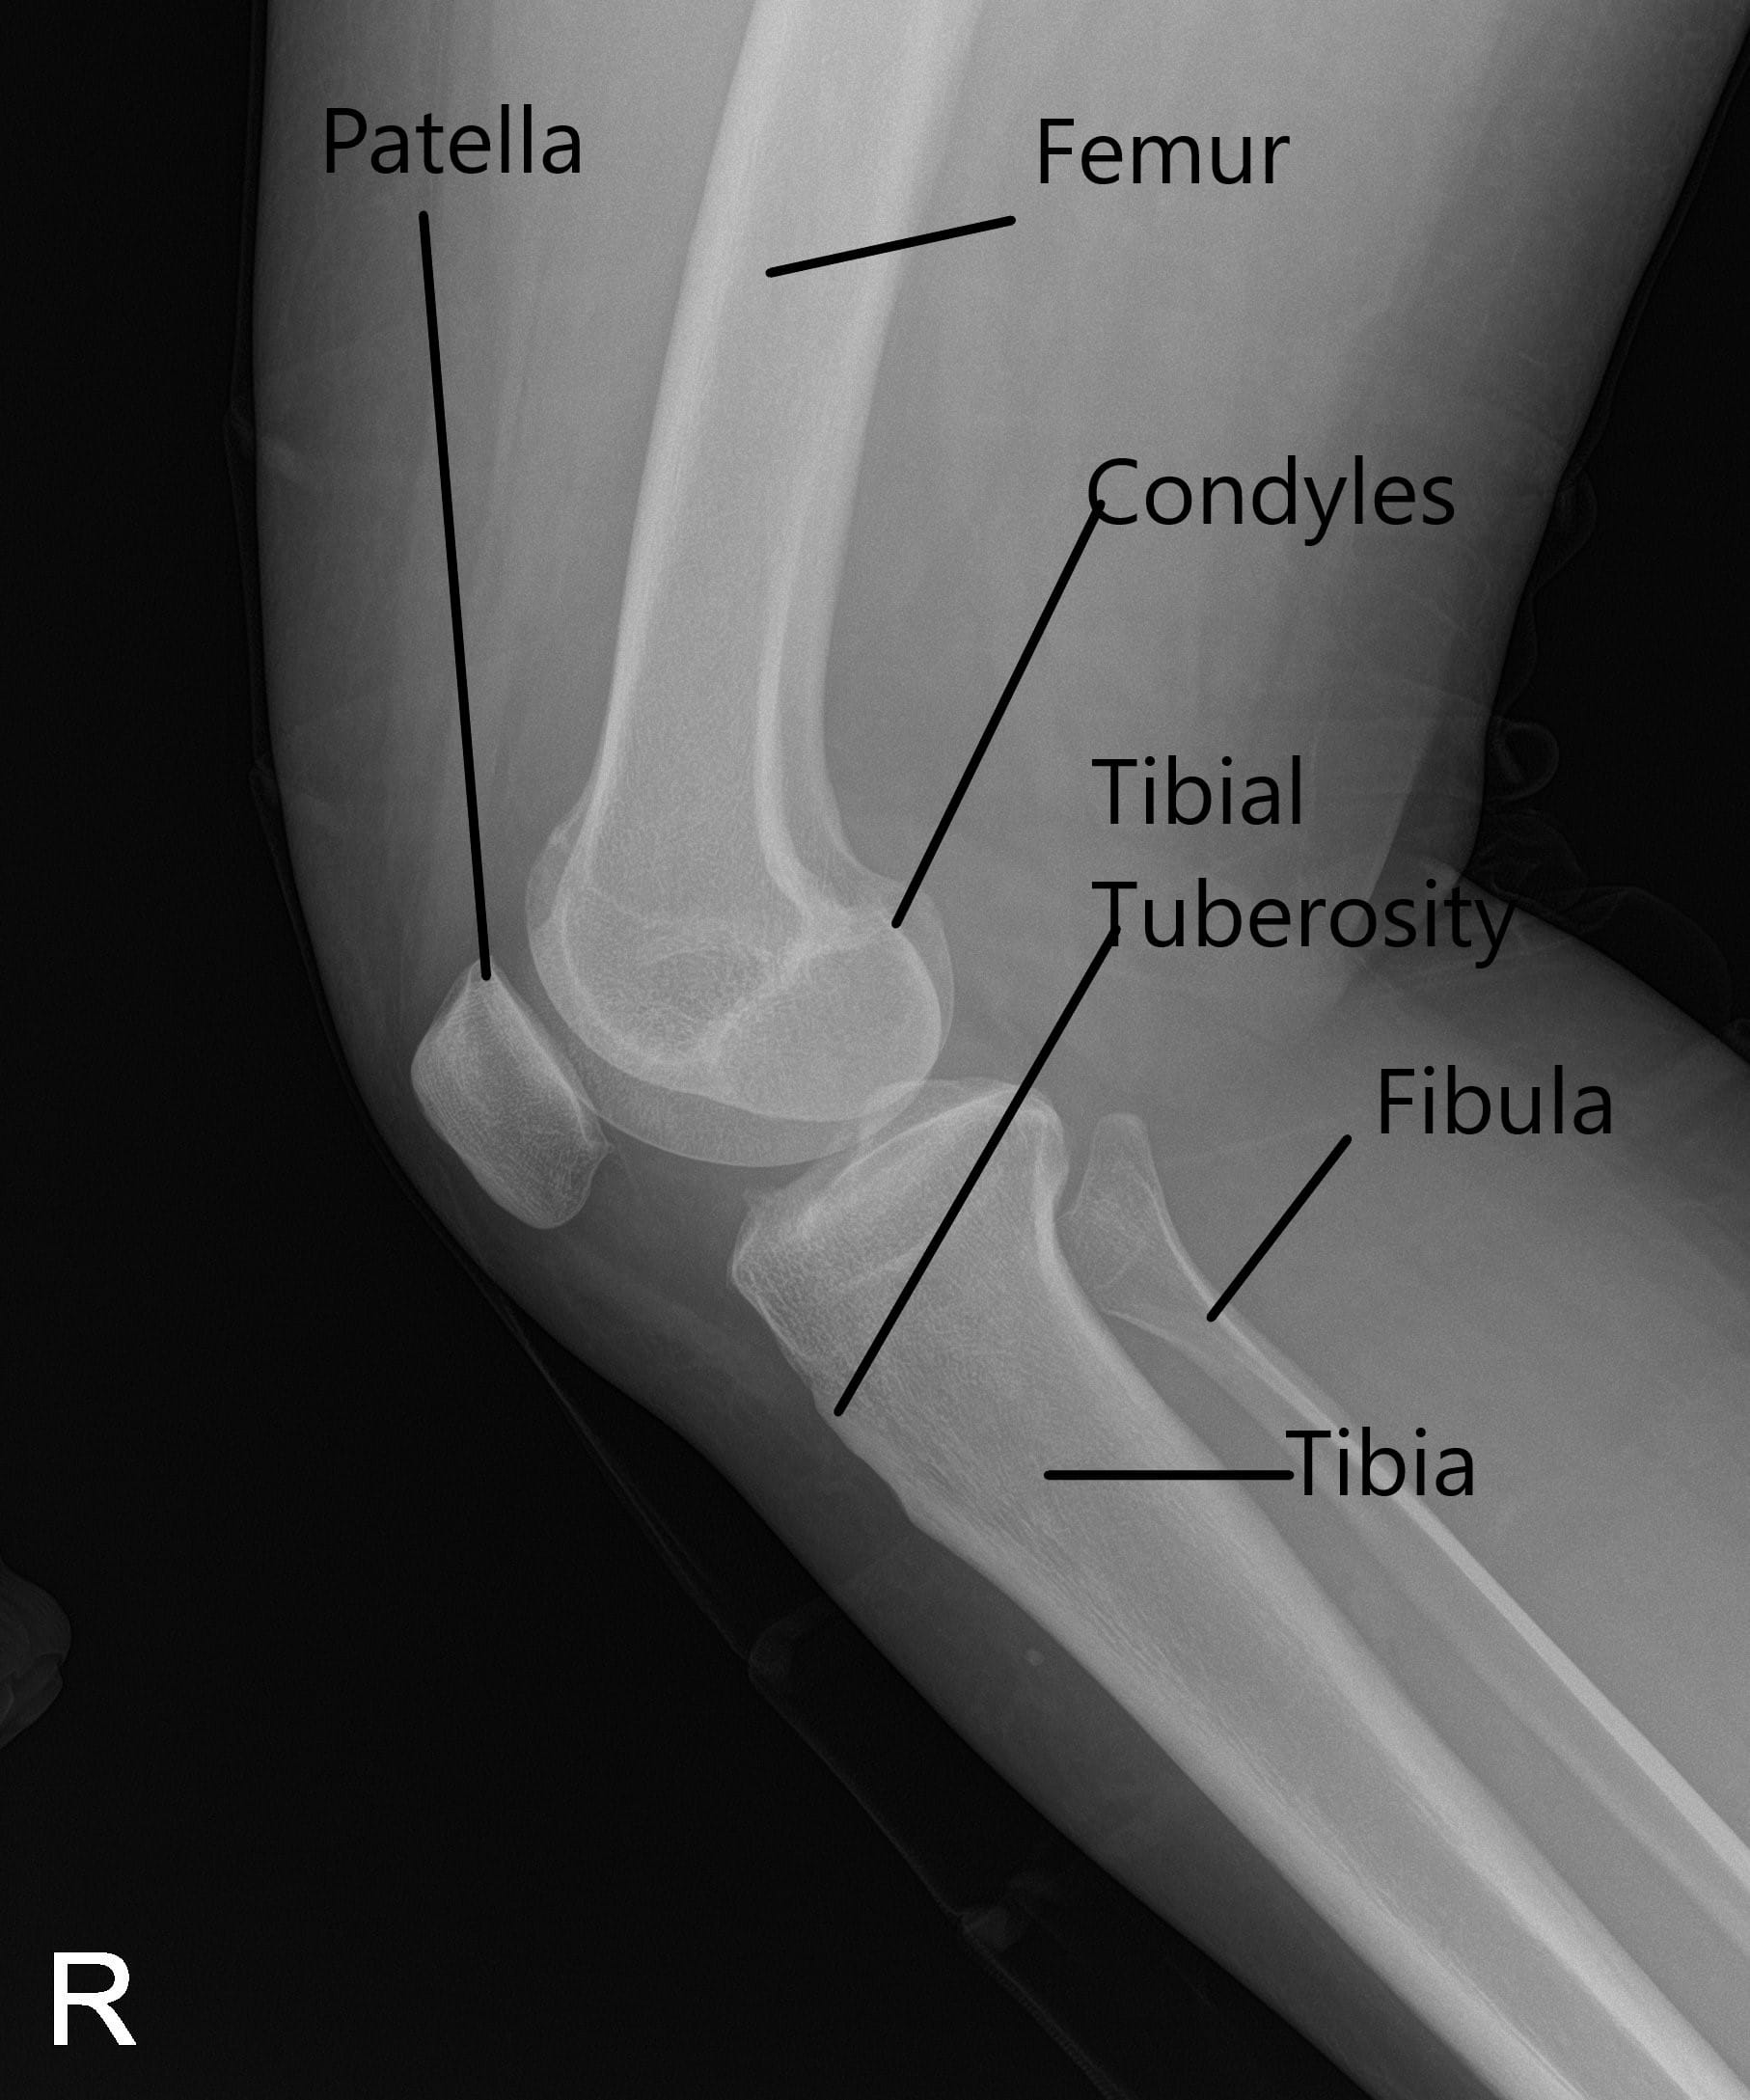 Case Study: Chondroplasty of Right Knee in 50 yr. Old Male